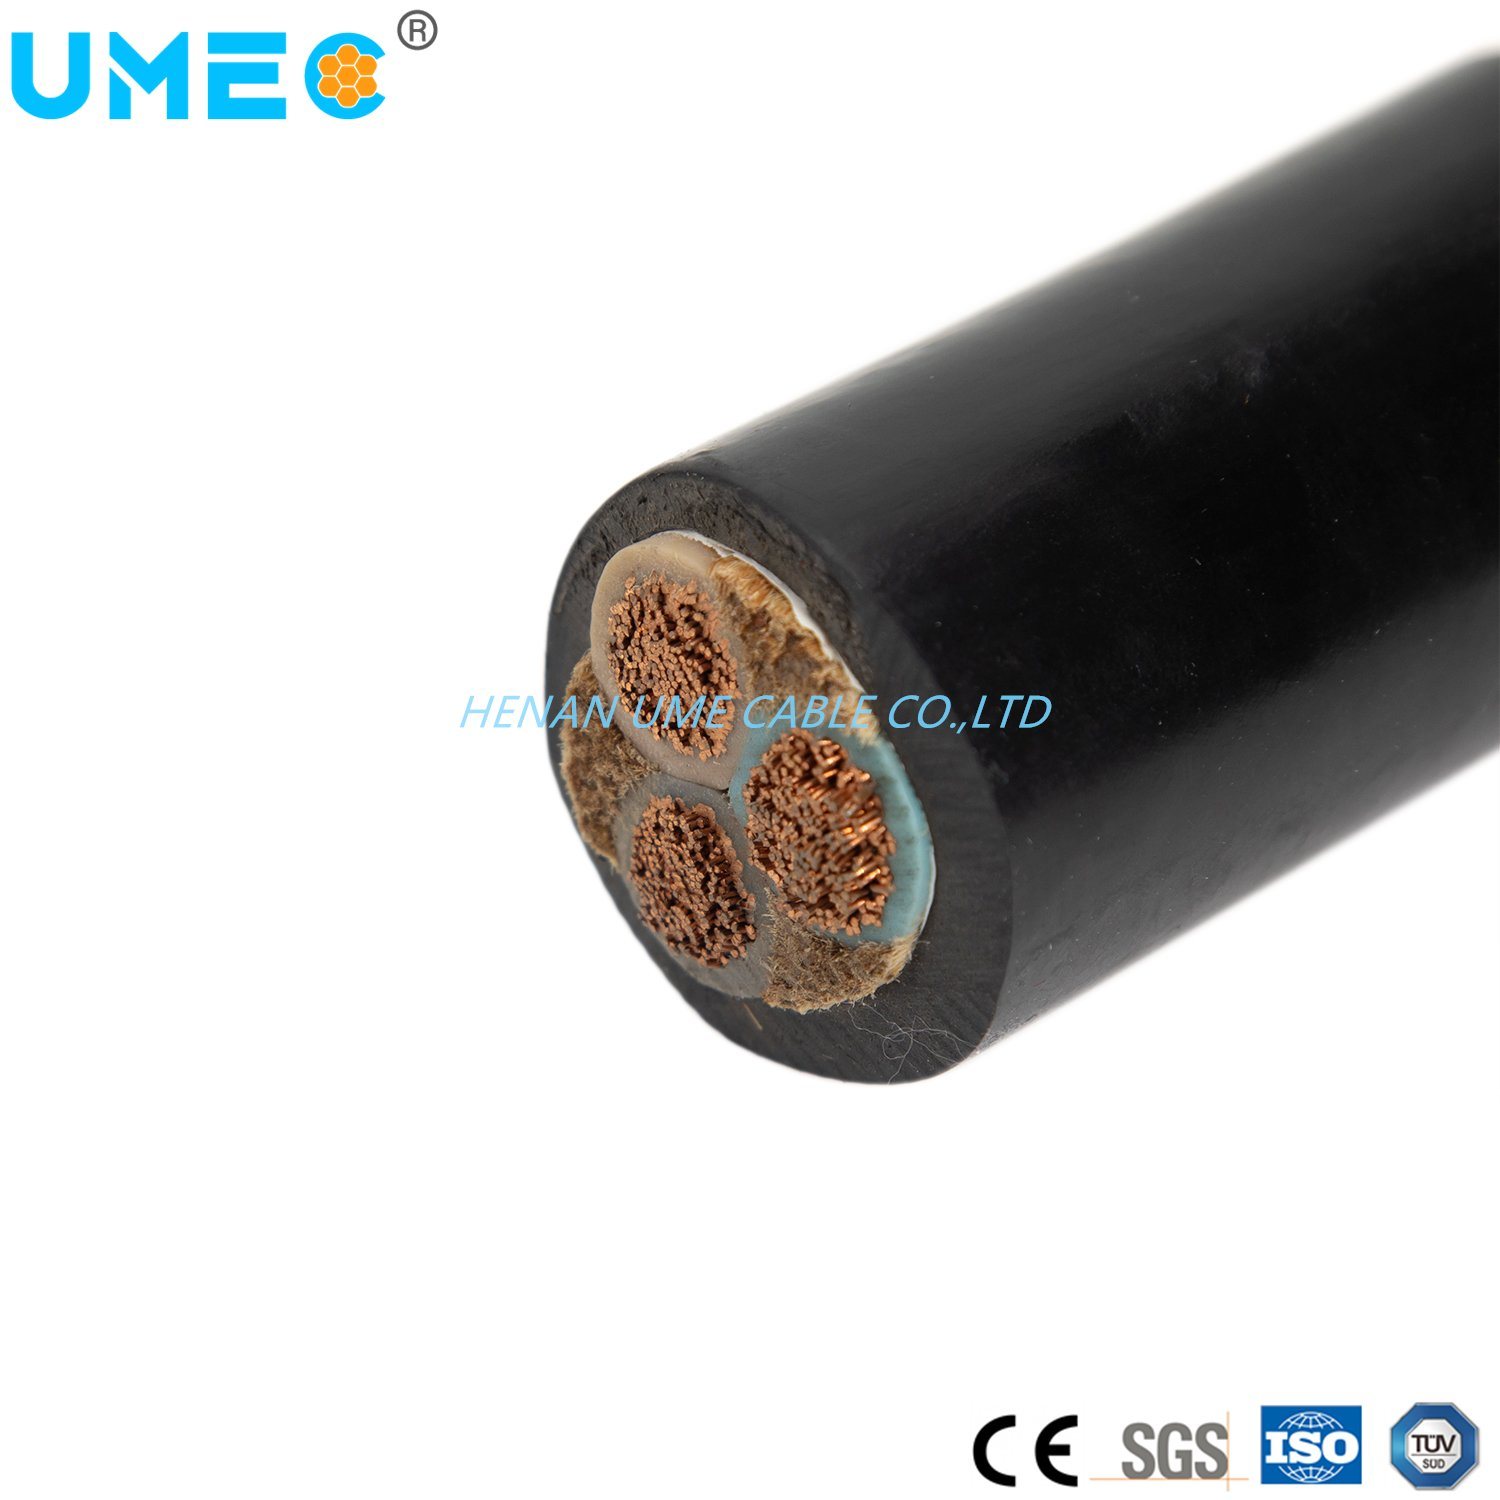 High Temperature Resistant Ume Brand 0.6/1kv Flexible 4 Cores 2.5mm 4X2.5mm2 Rubber Black/Grey Cable